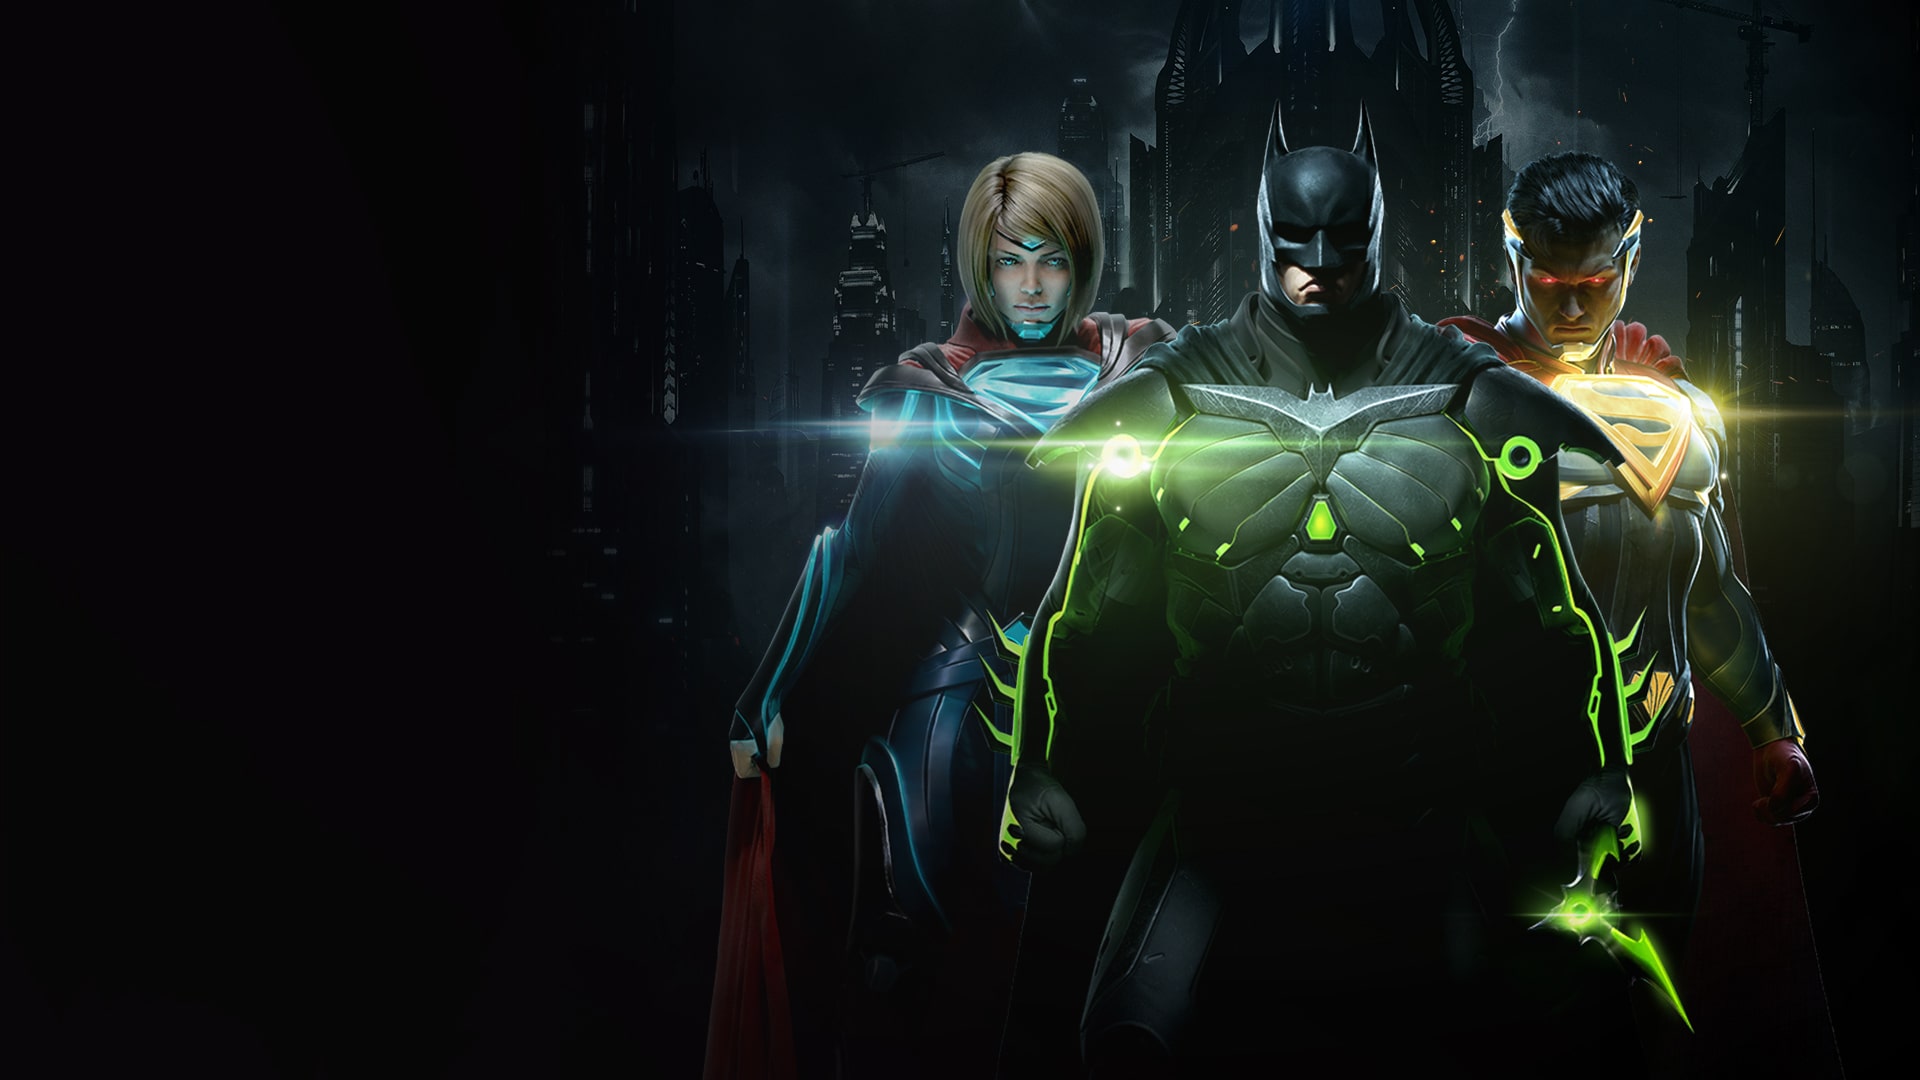 injustice playstation store